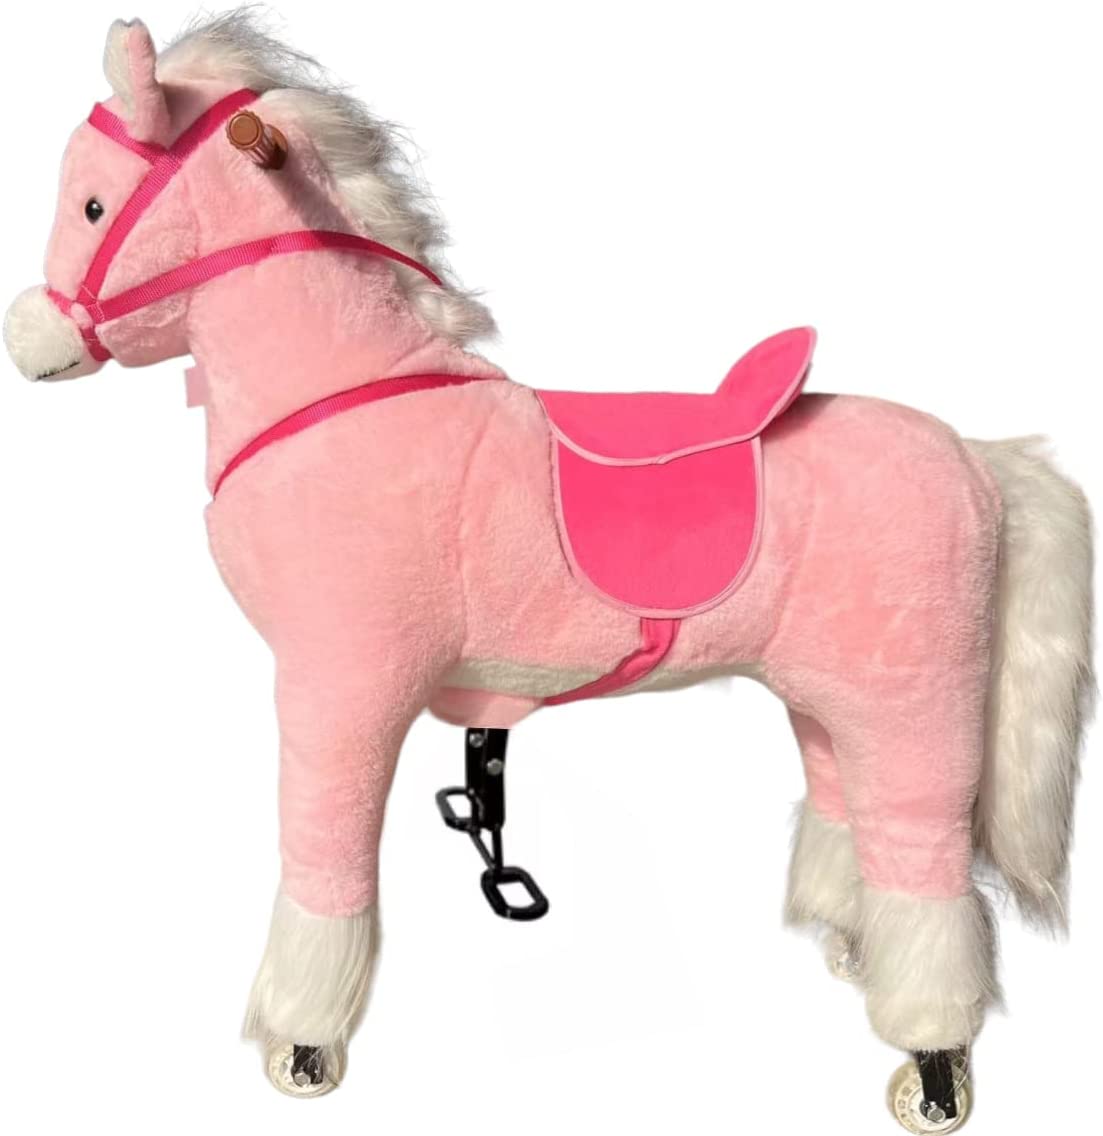 Lovely Baby Ride On Horse LB J001 For Kids, Horse Riding Toys Action Pony Large Mechanical Horse To Ride On Bounce Up And Down And Move For Children 4-12 Years (Pink)